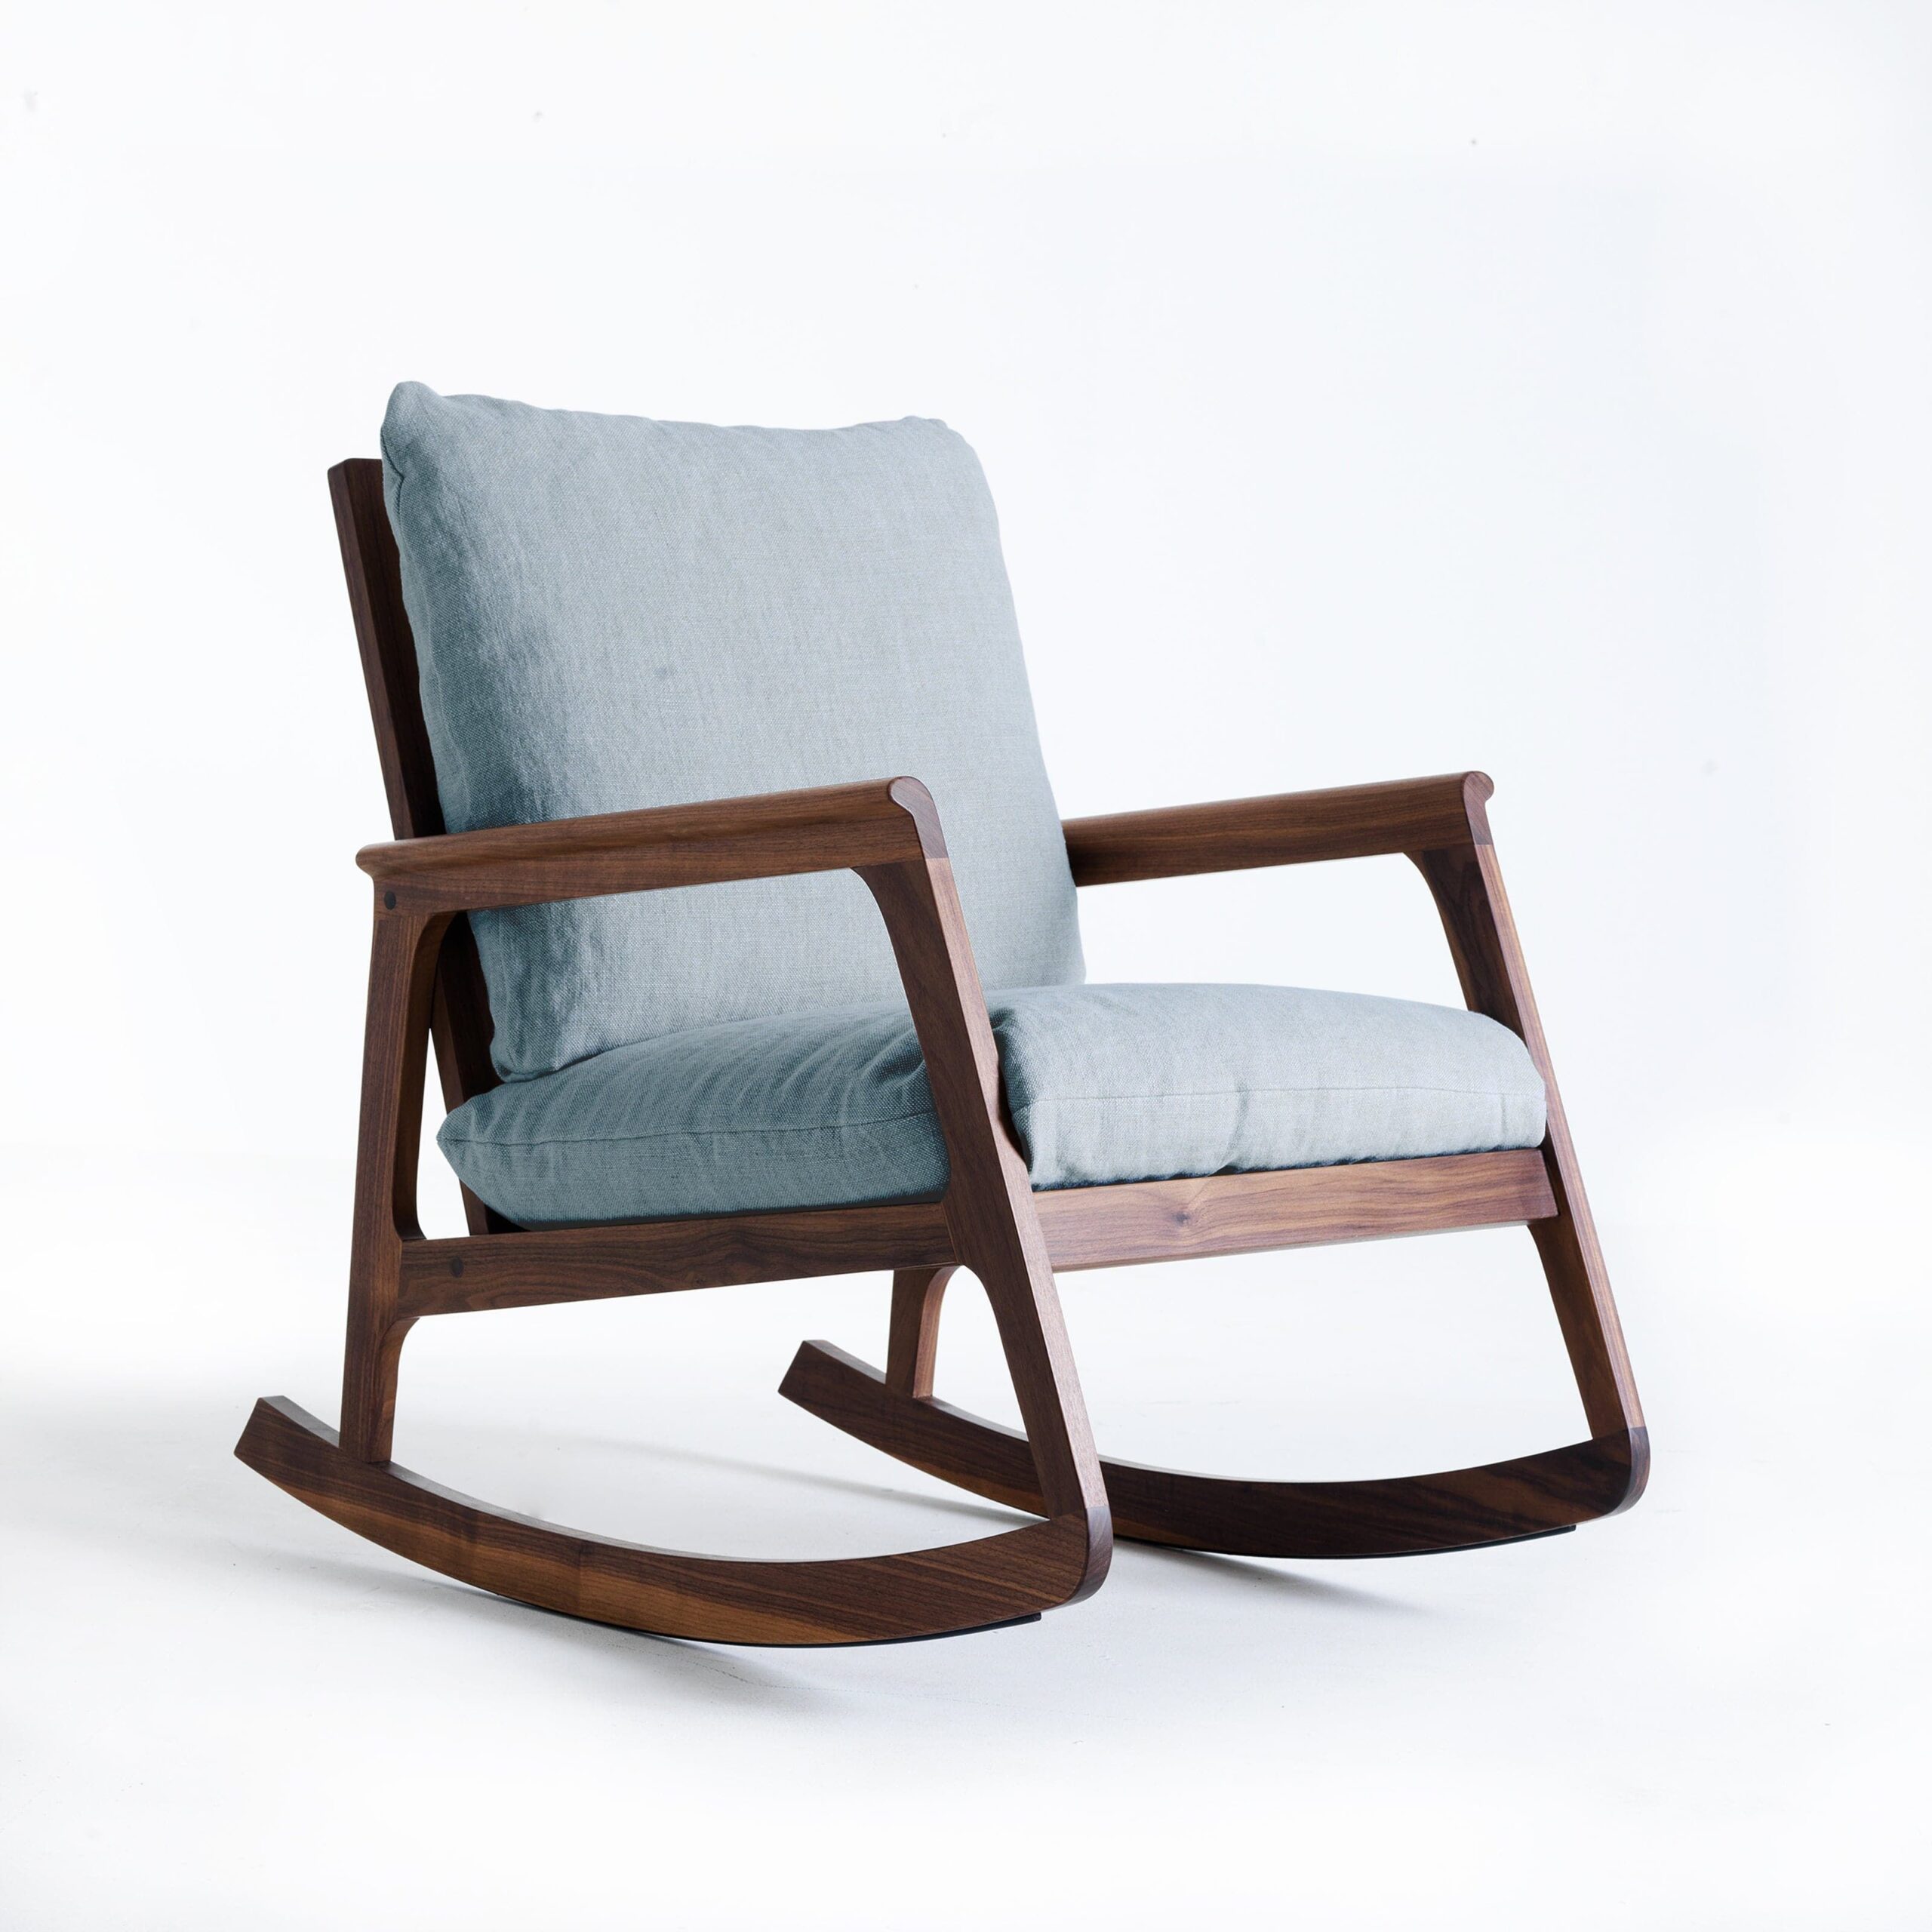 Rocking Chair Design Elevate Your Comfort with a Stylish Rocking Chair Upgrade